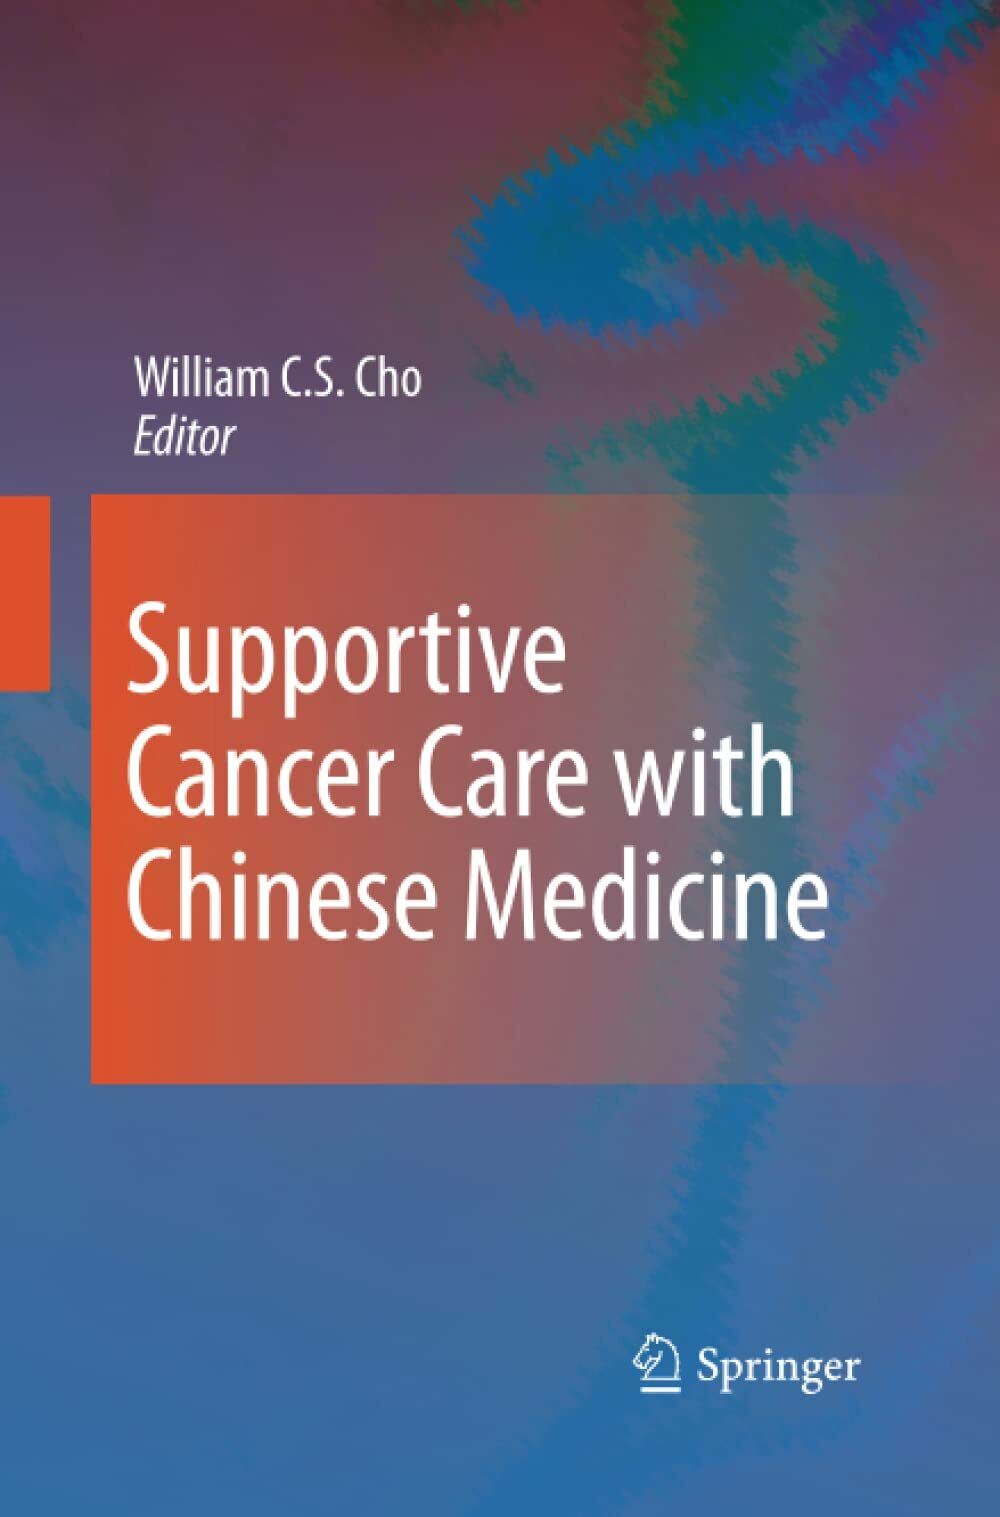 Supportive Cancer Care with Chinese Medicine - William C.S. Cho - Springer,2014